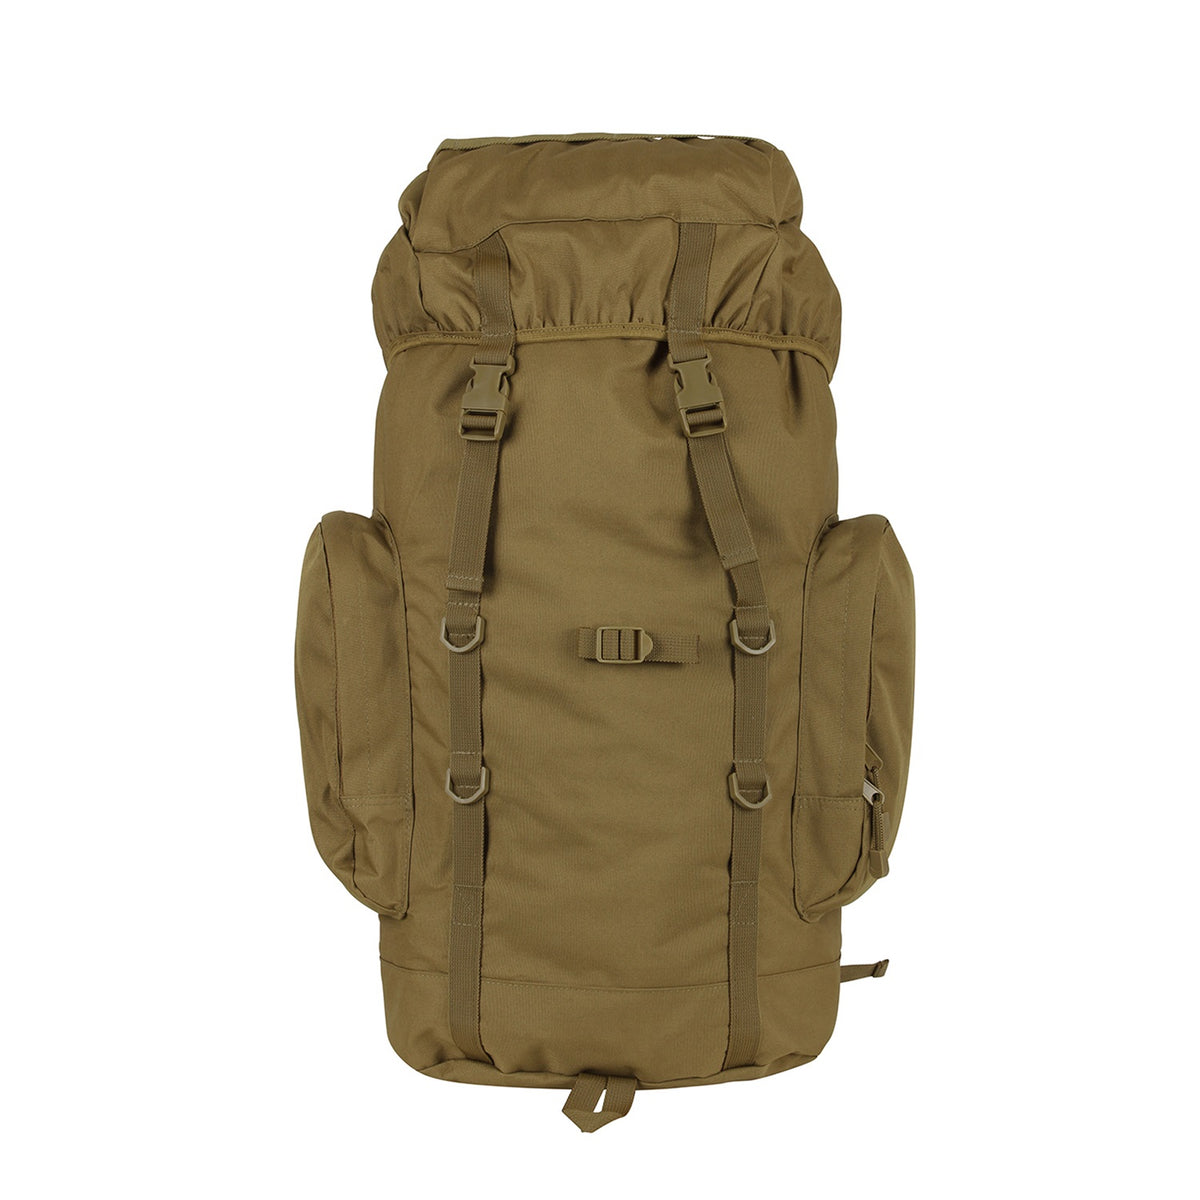 Rothco 45L Tactical Backpack Coyote Brown